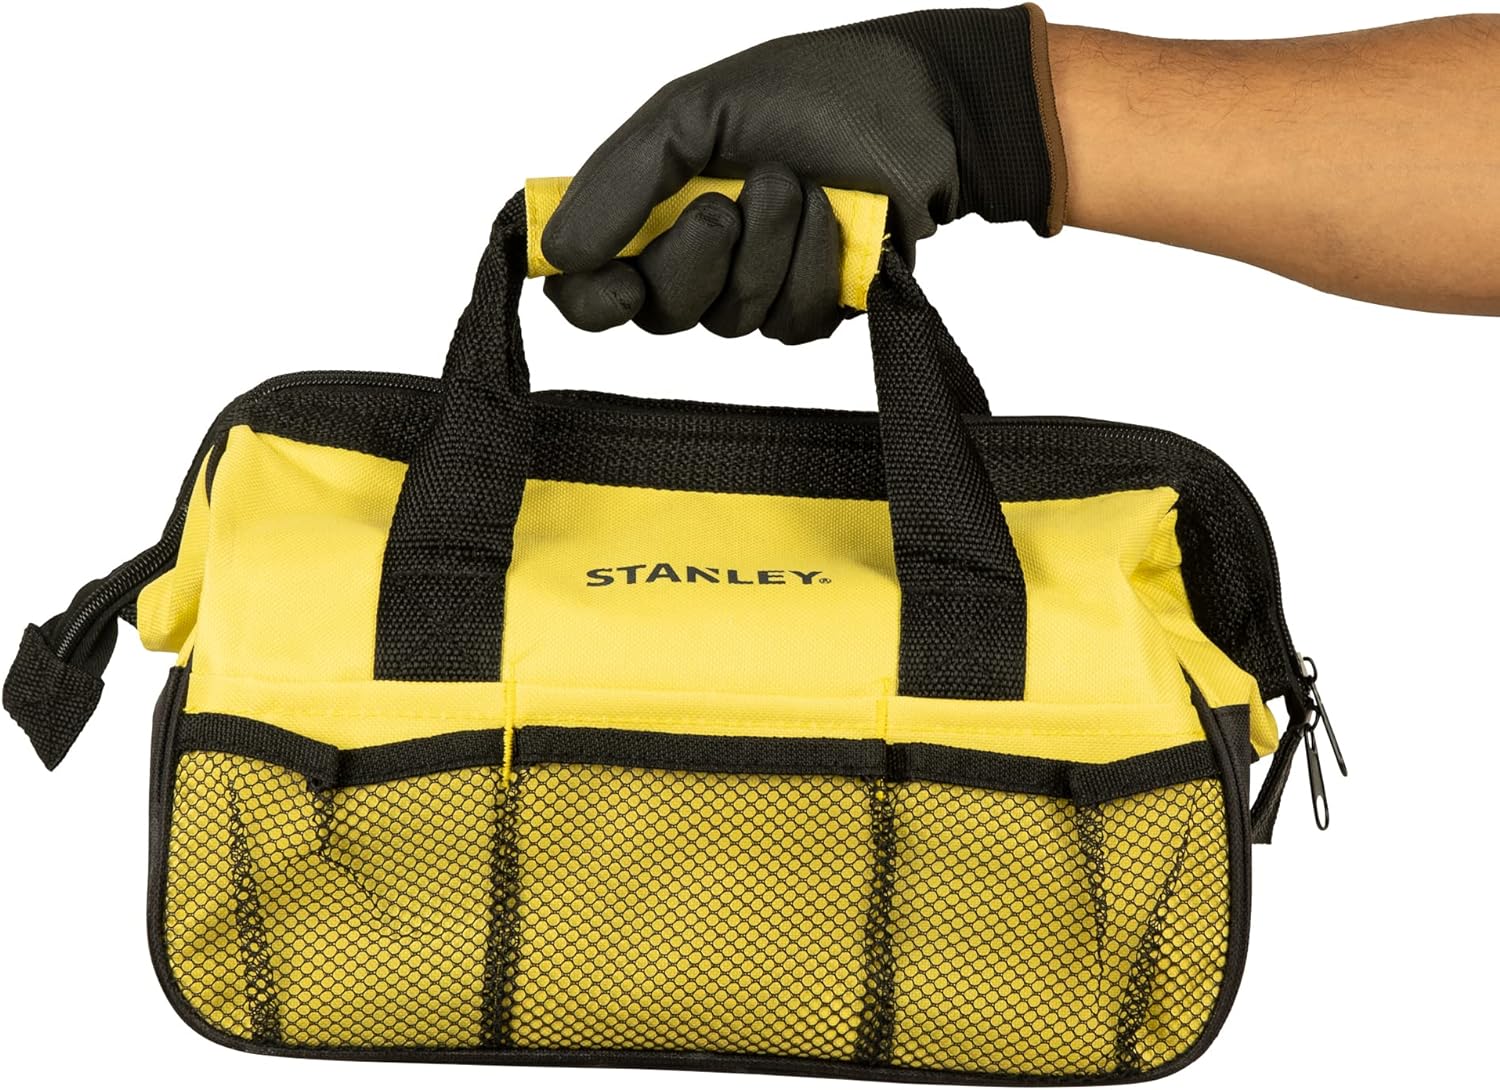 STANLEY Material Tool Set, 38 Pieces, Stmt0-74101